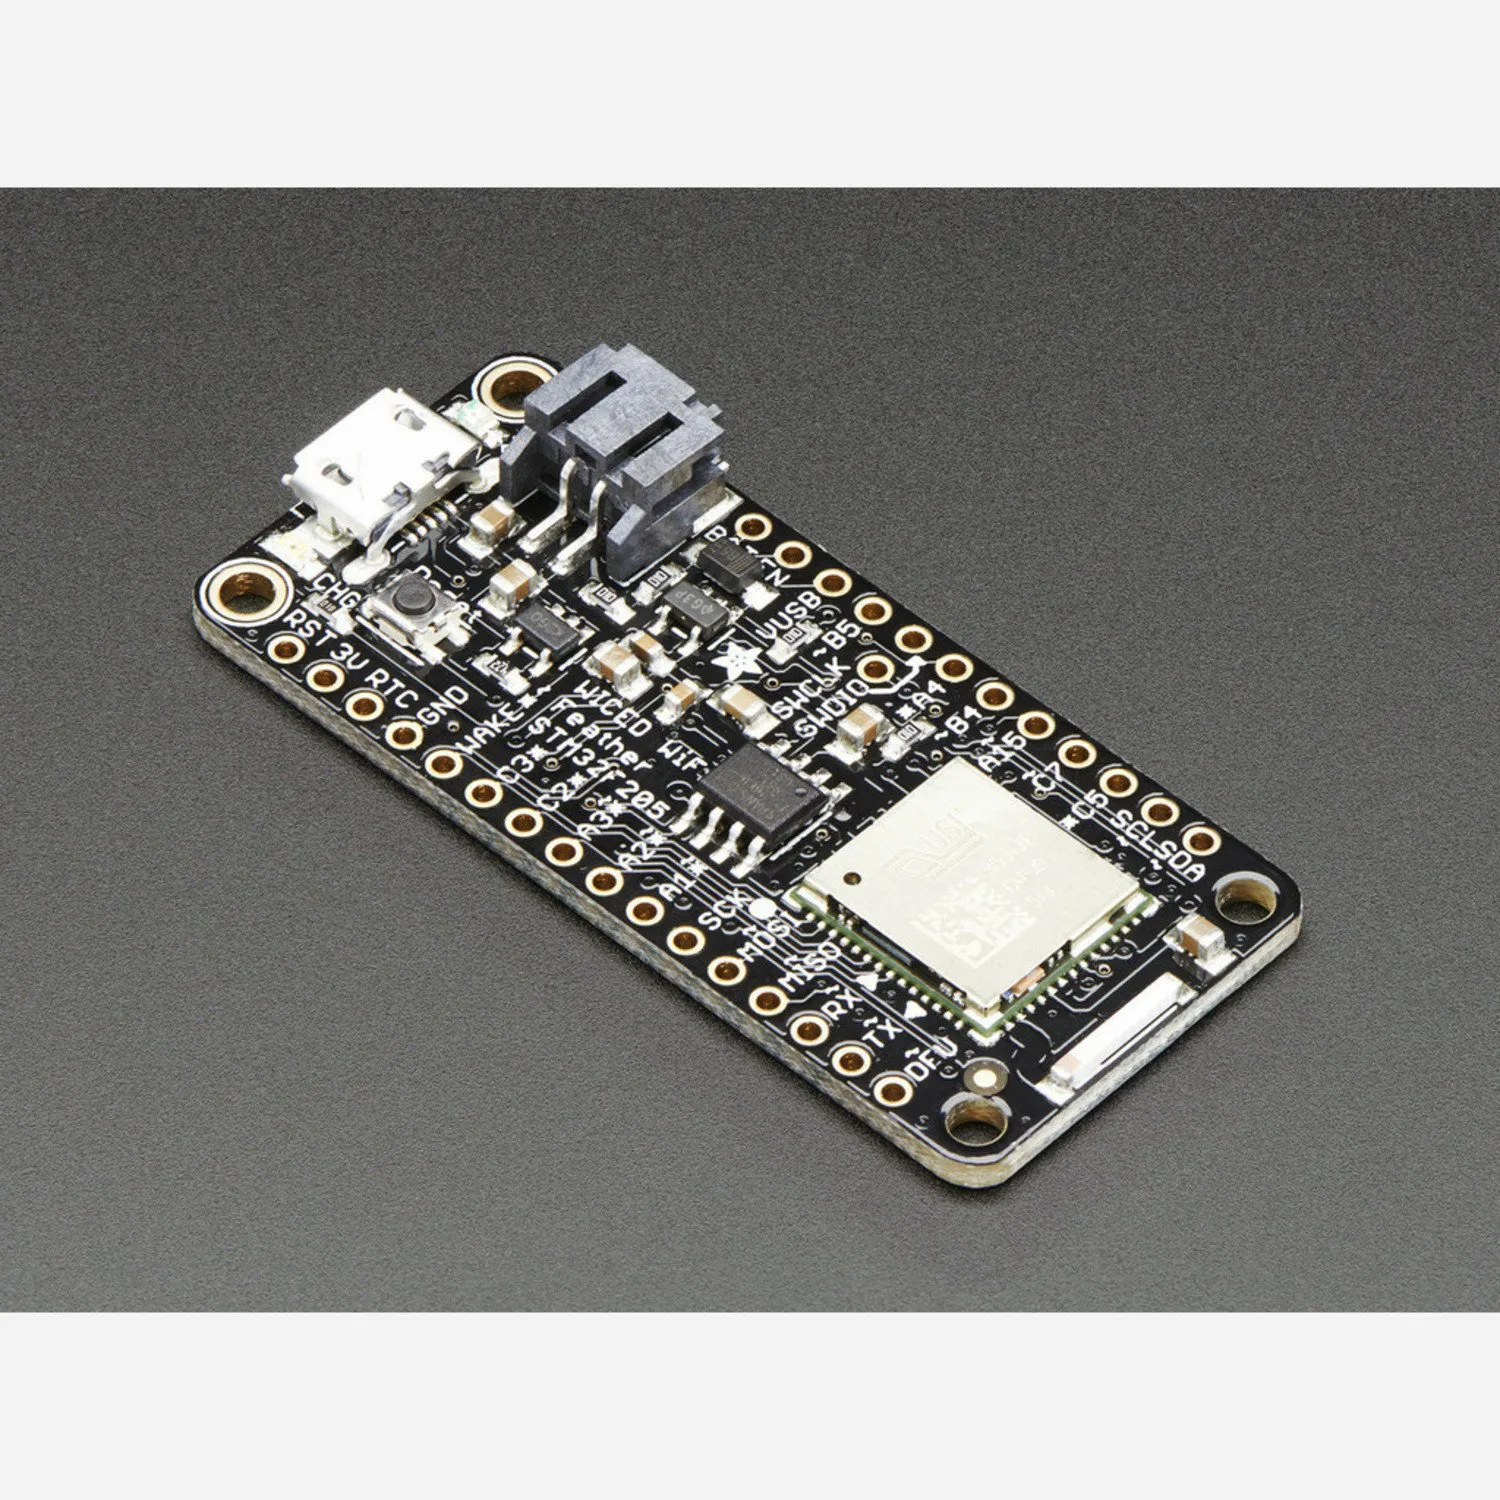 Photo of Adafruit WICED WiFi Feather - STM32F205 with Cypress WICED WiFi